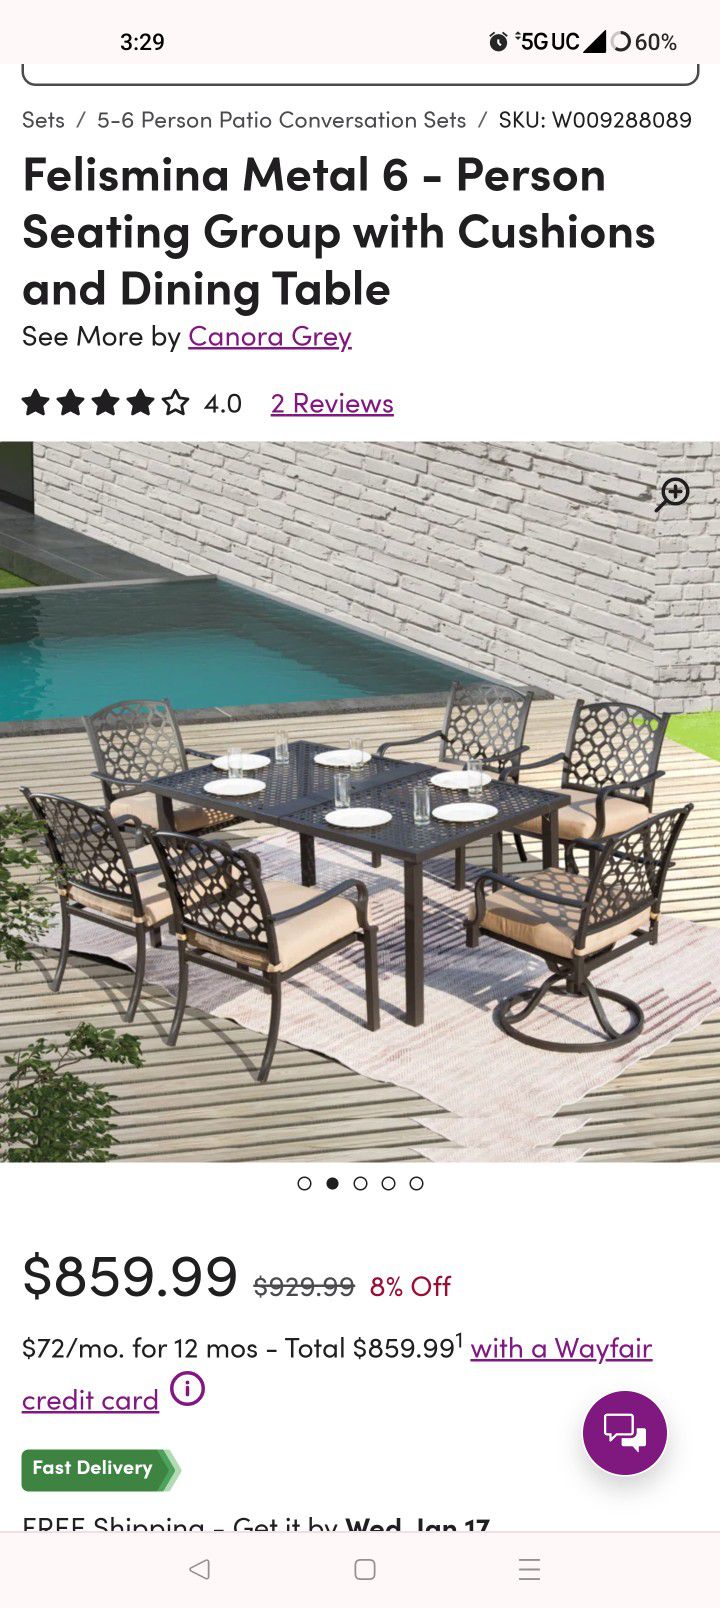 6 Person Seating Group with Cushions and Dining Table